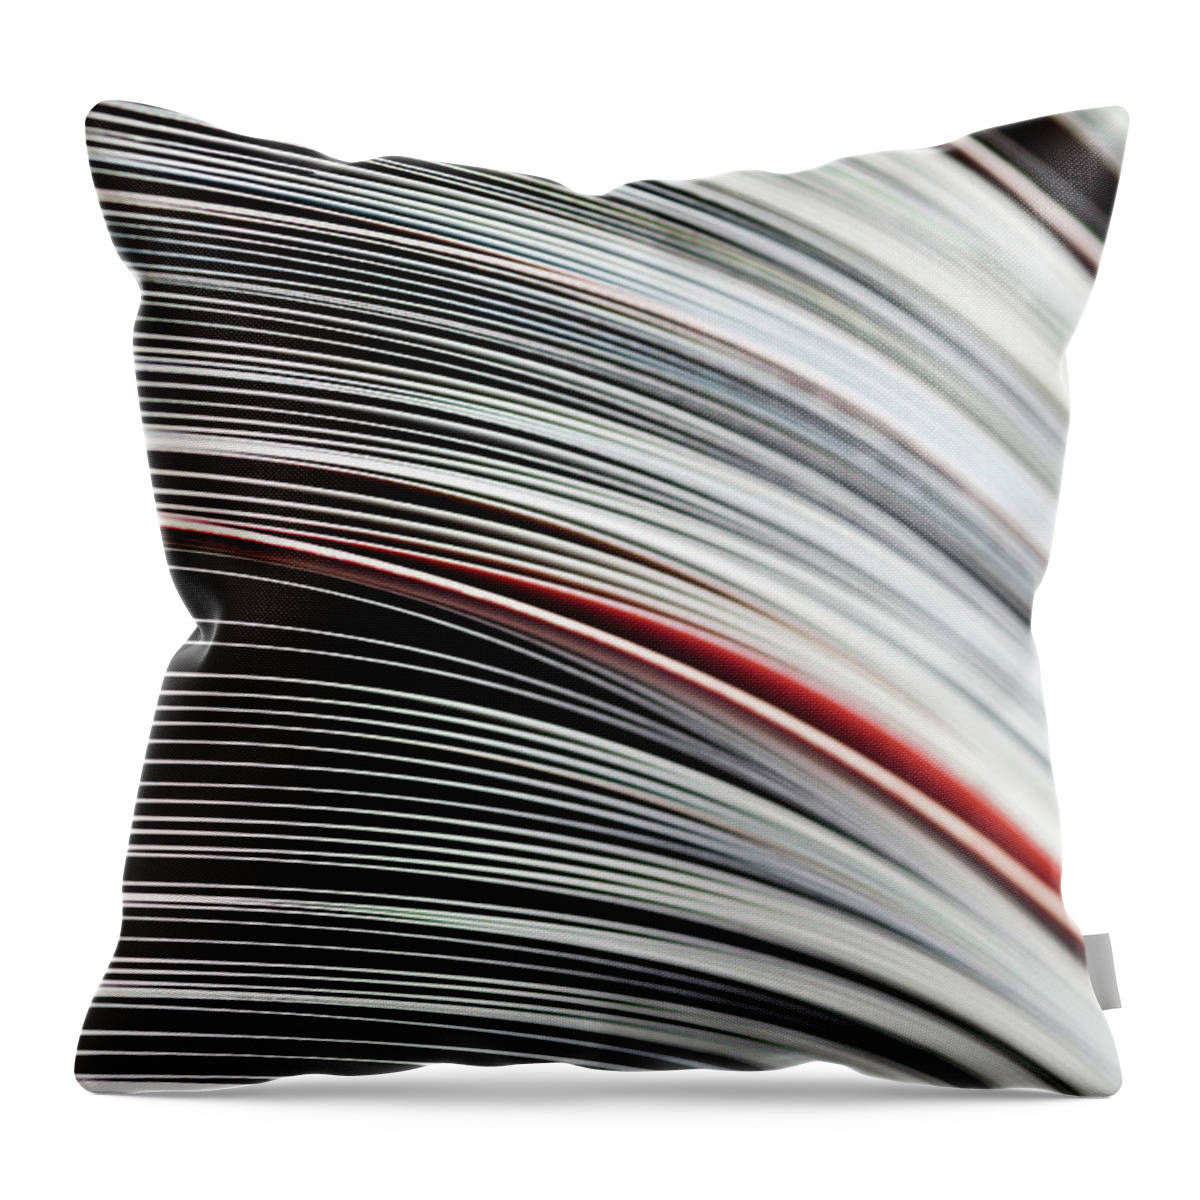 The Media Throw Pillow featuring the photograph Open Magazines by Dirkrietschel